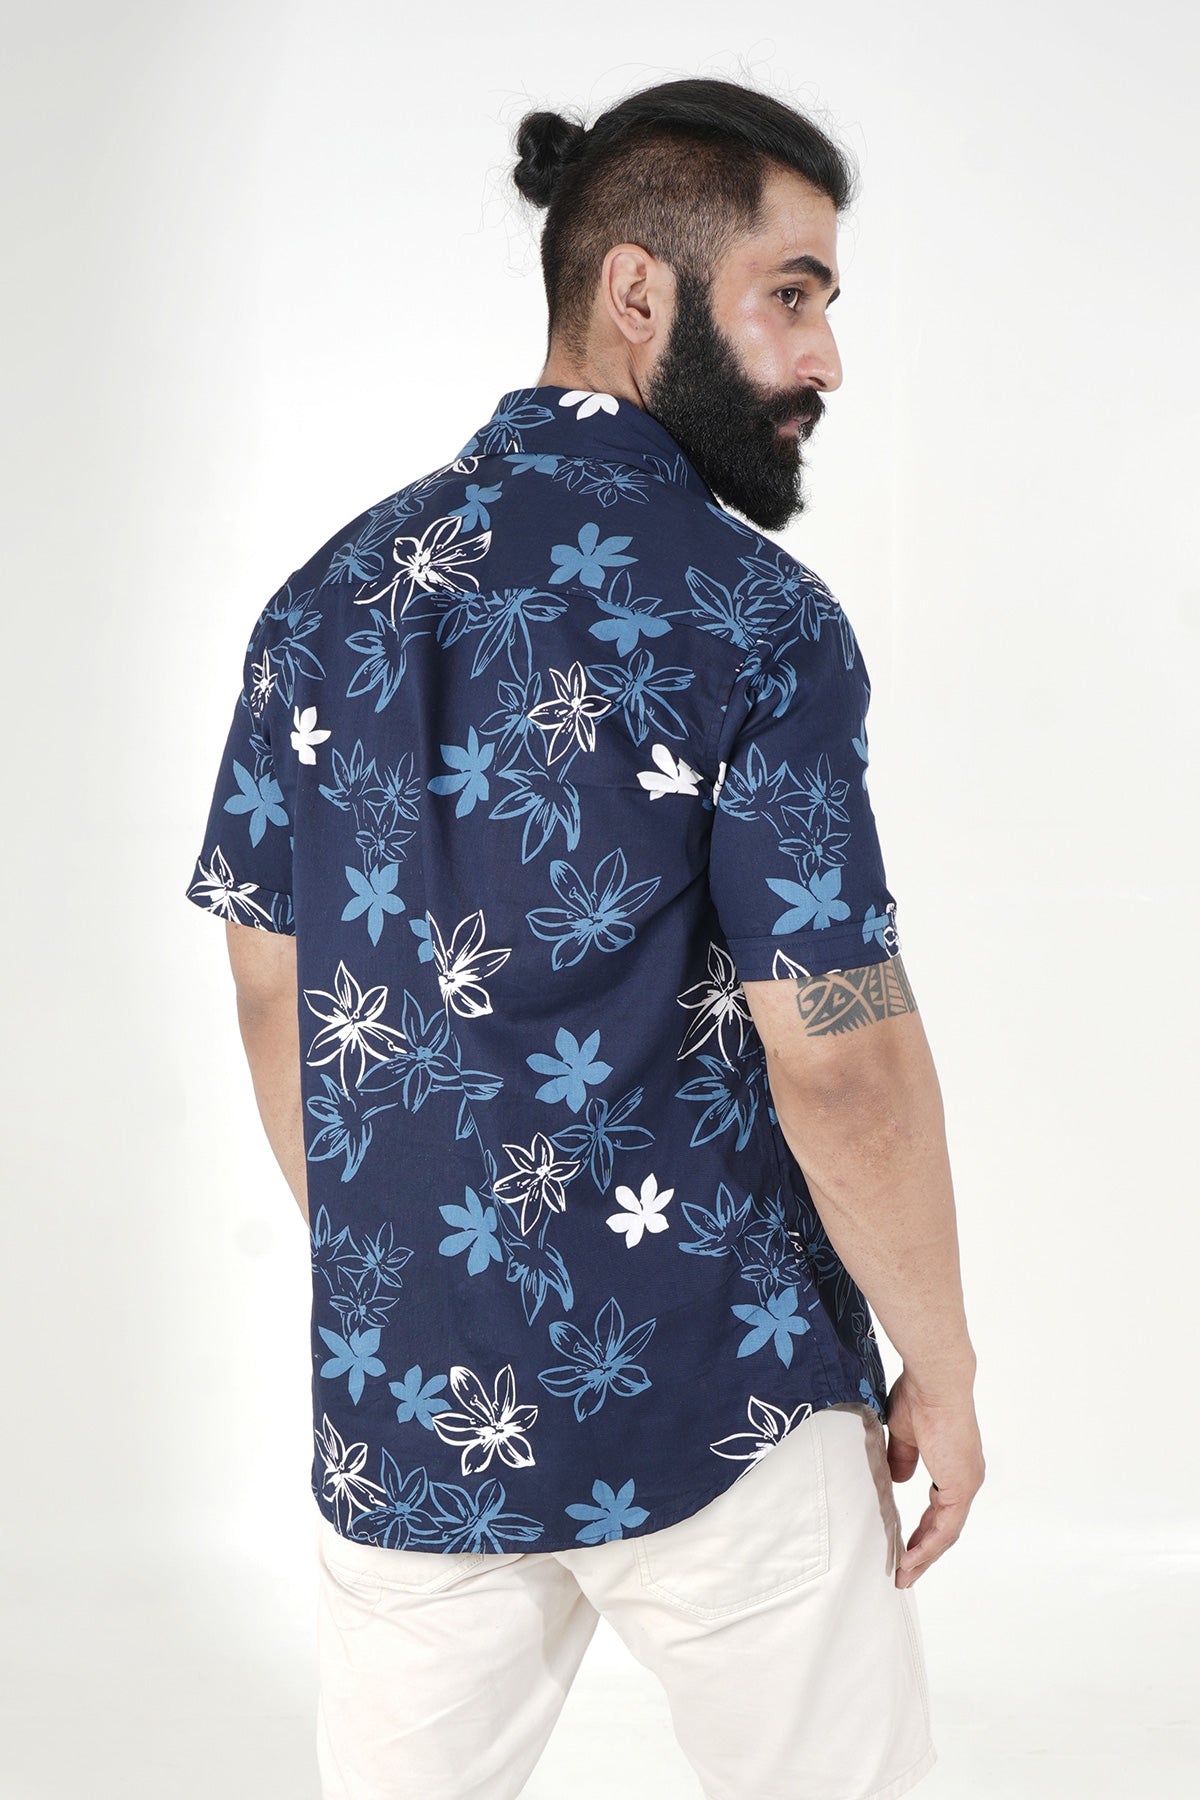 Blue color shirt Flowers print half sleeves Cotton shirt – Style Matters